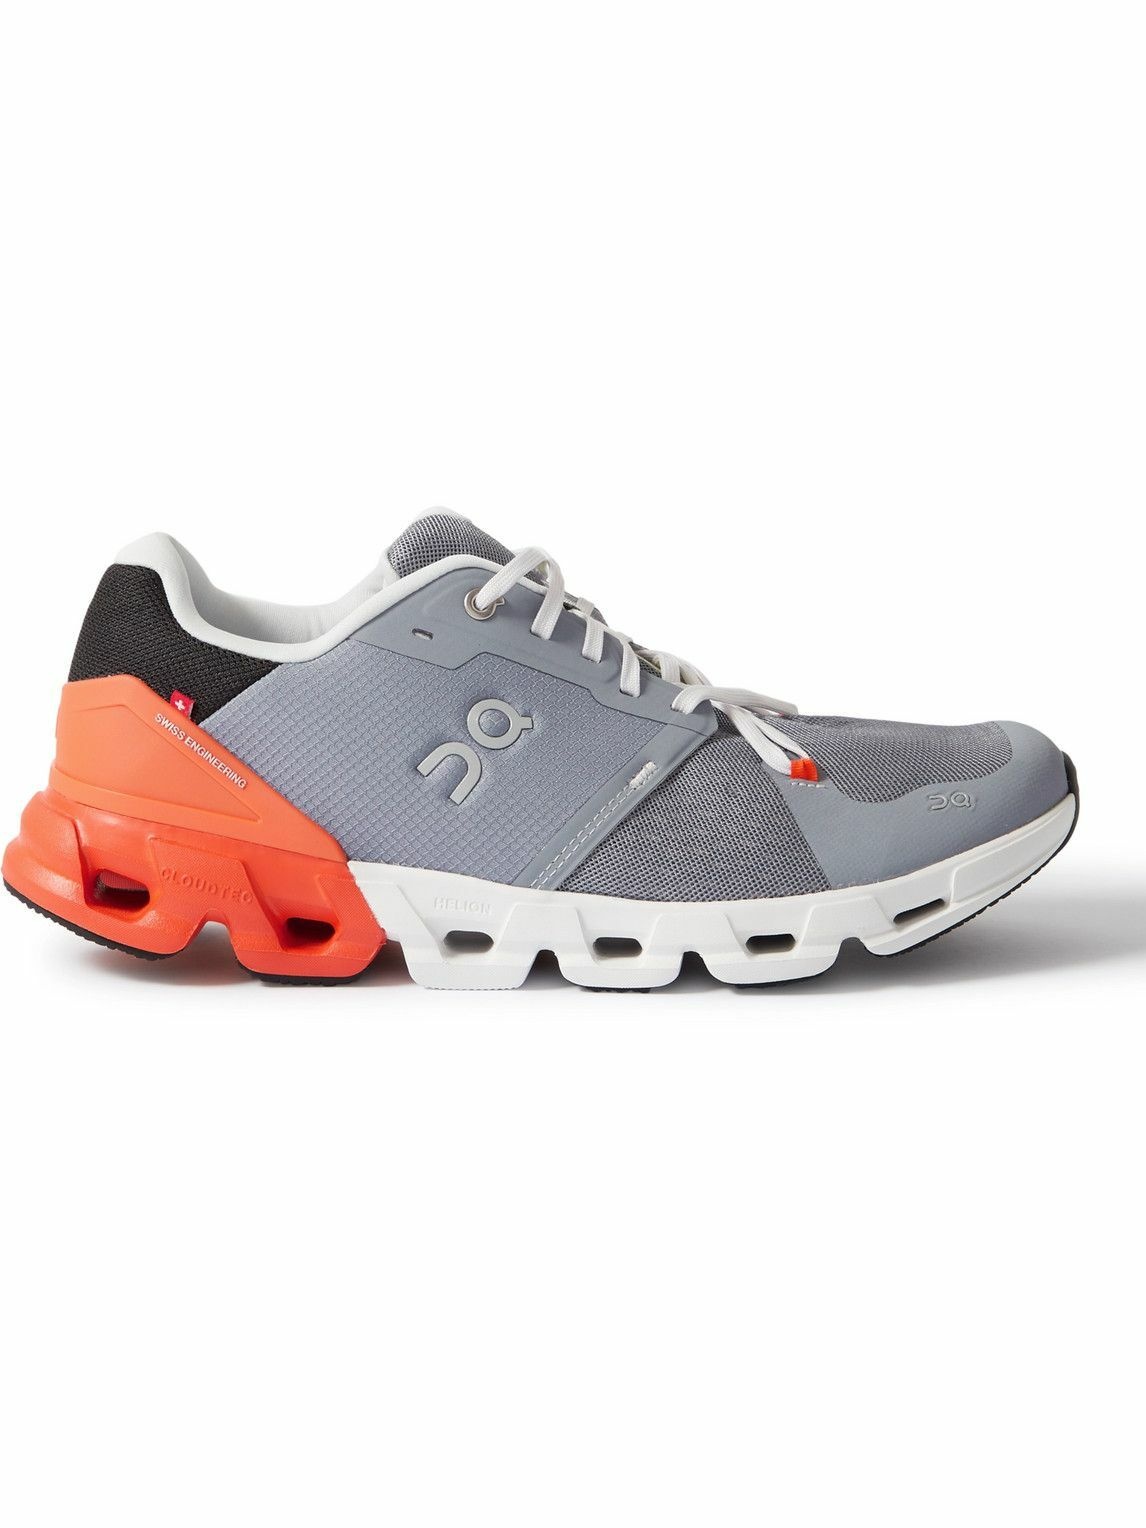 ON, Cloudflow 4 Rubber-Trimmed Mesh Running Sneakers